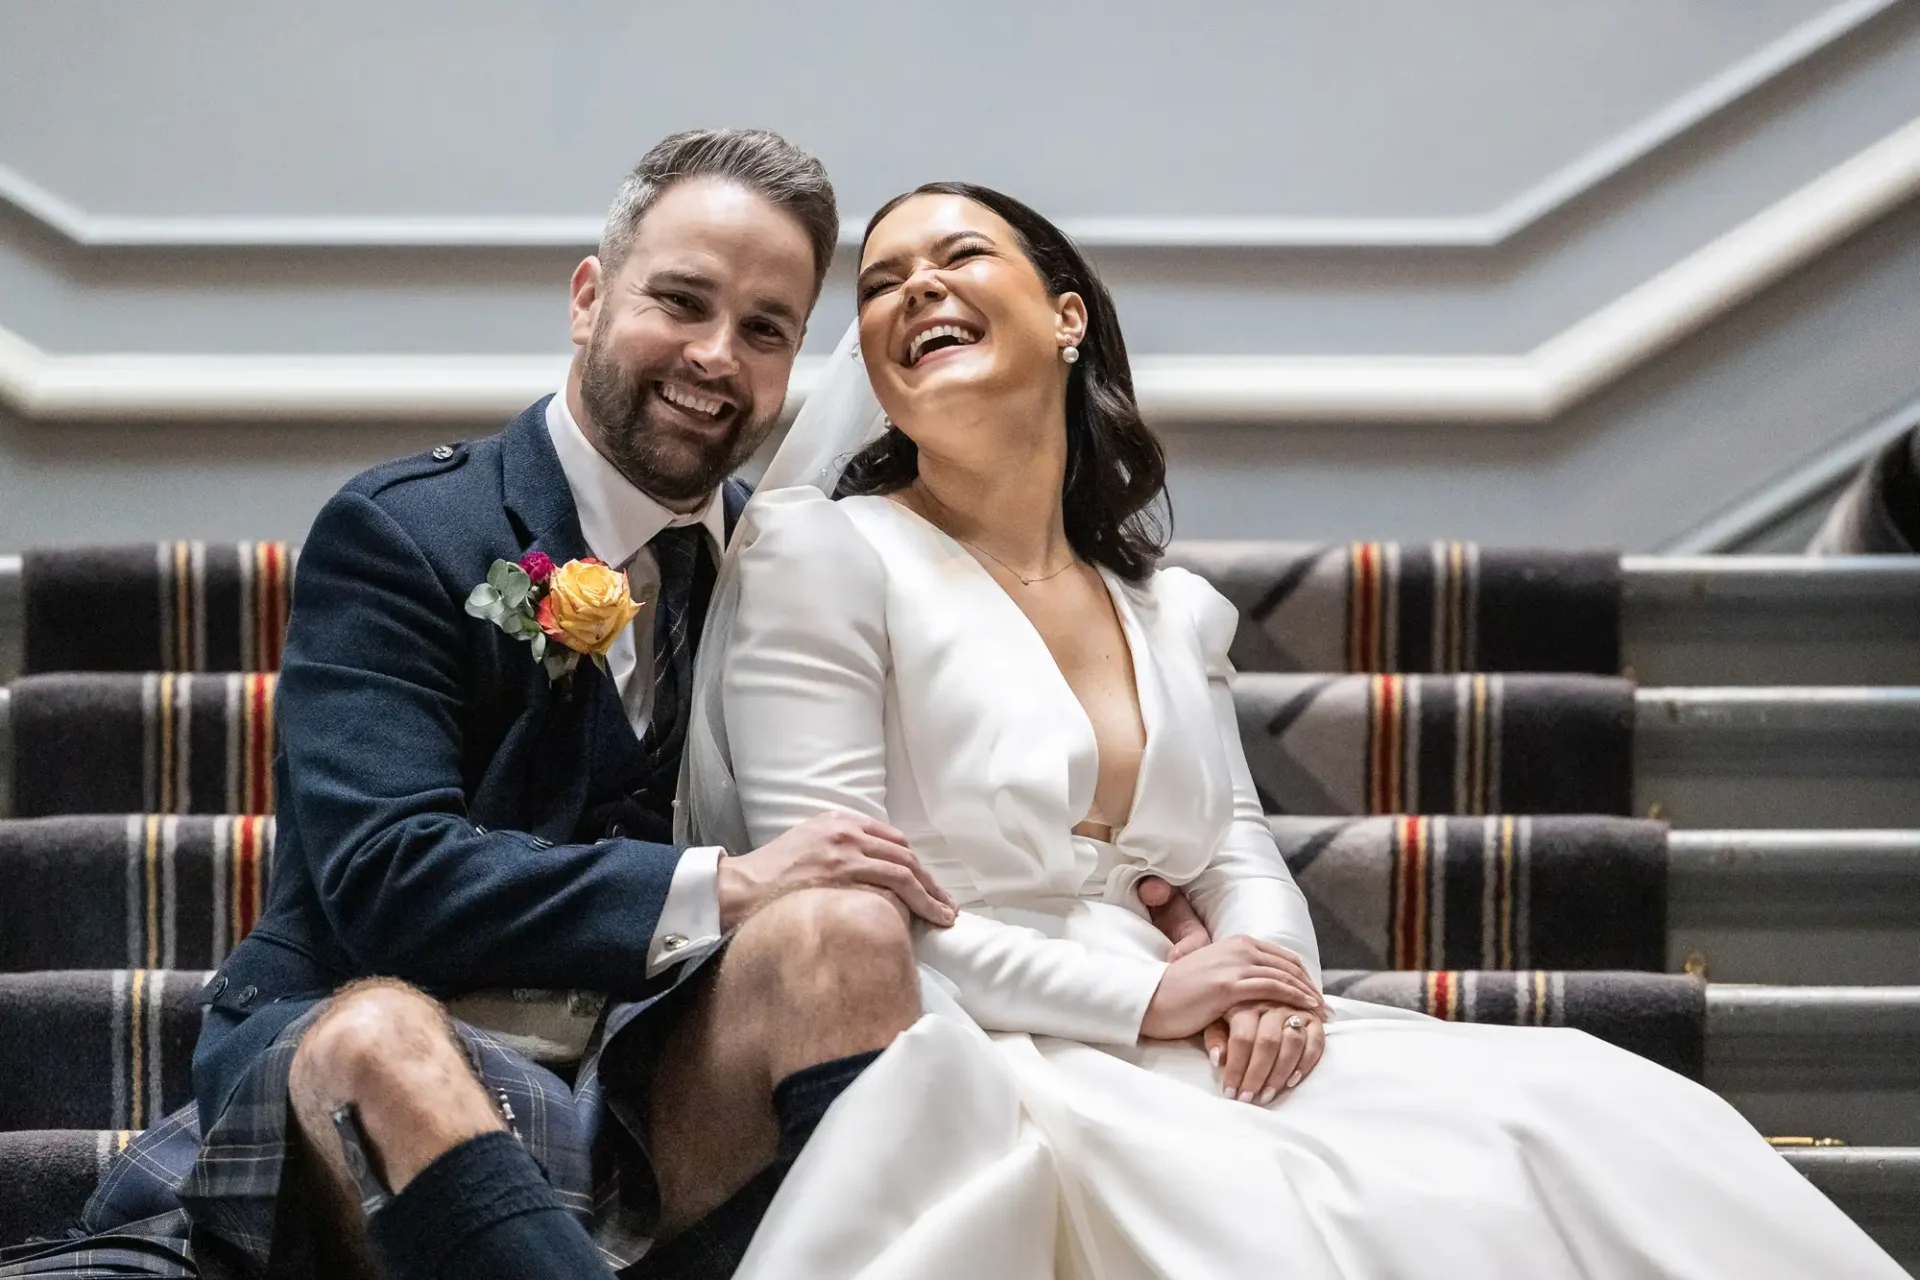 A joyful couple in wedding attire sitting on a staircase, the man in a kilt and the woman in a white dress, both laughing.